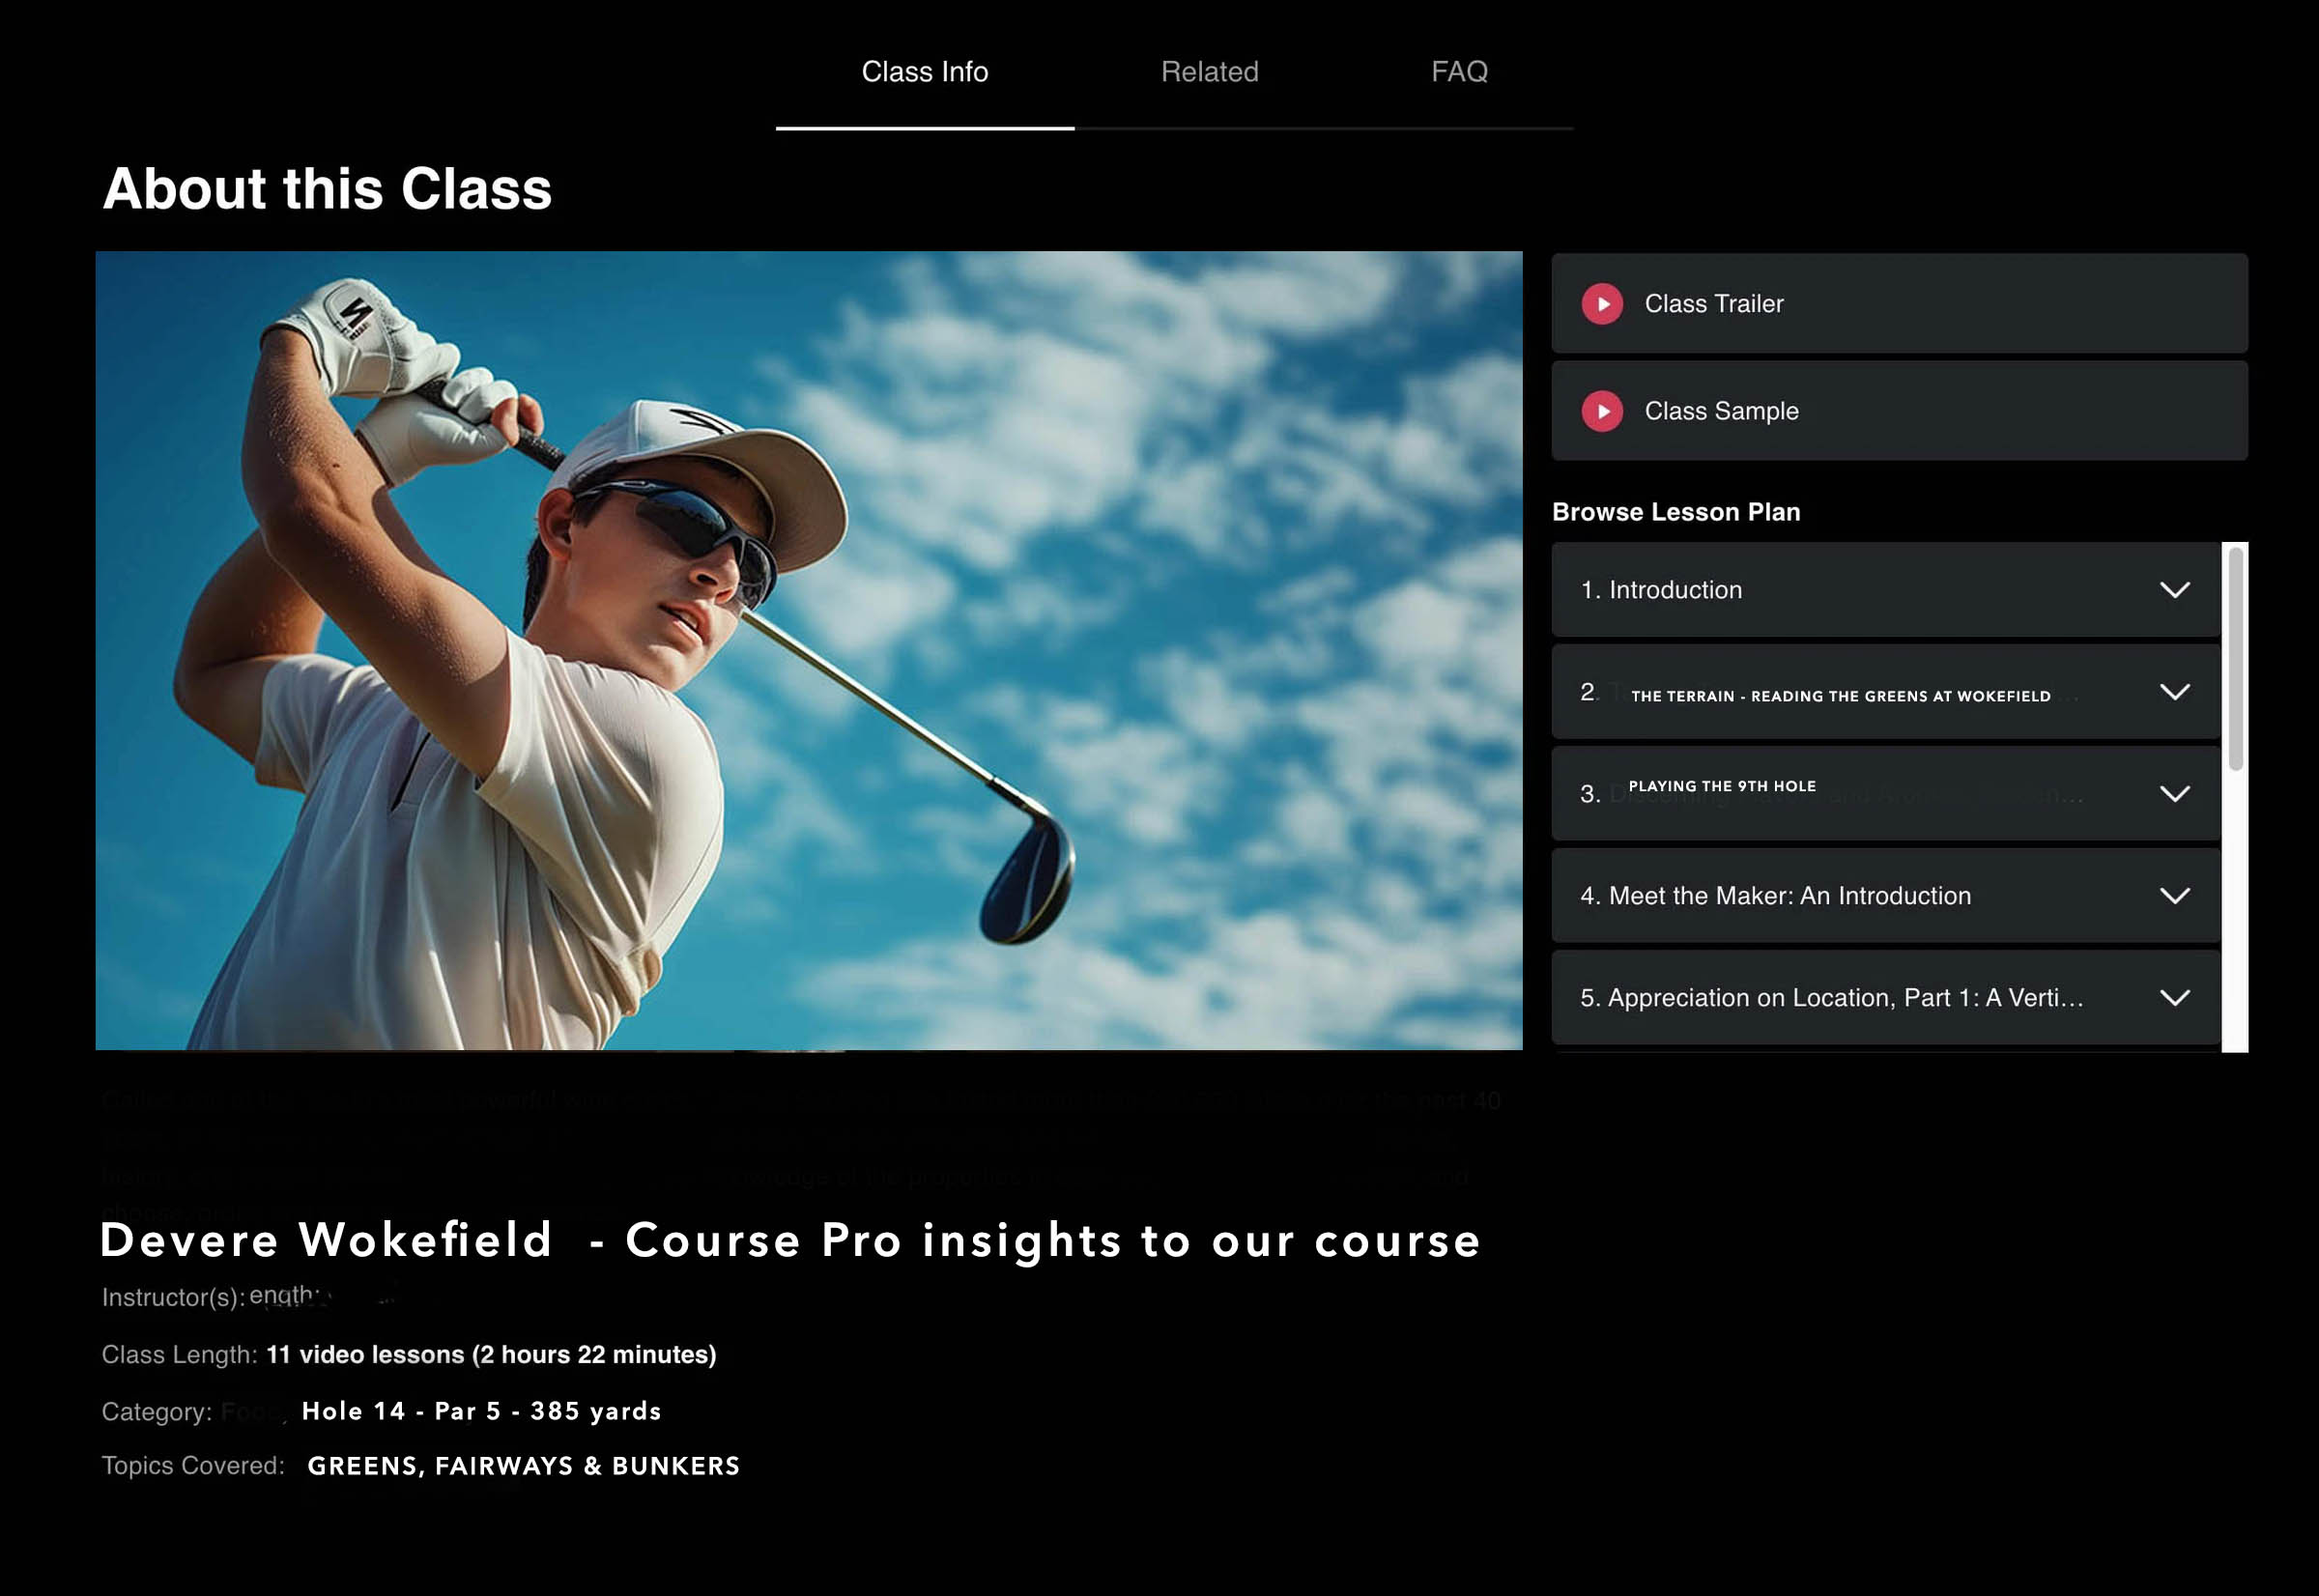 online golf training modules by creation bureau learn about the courses